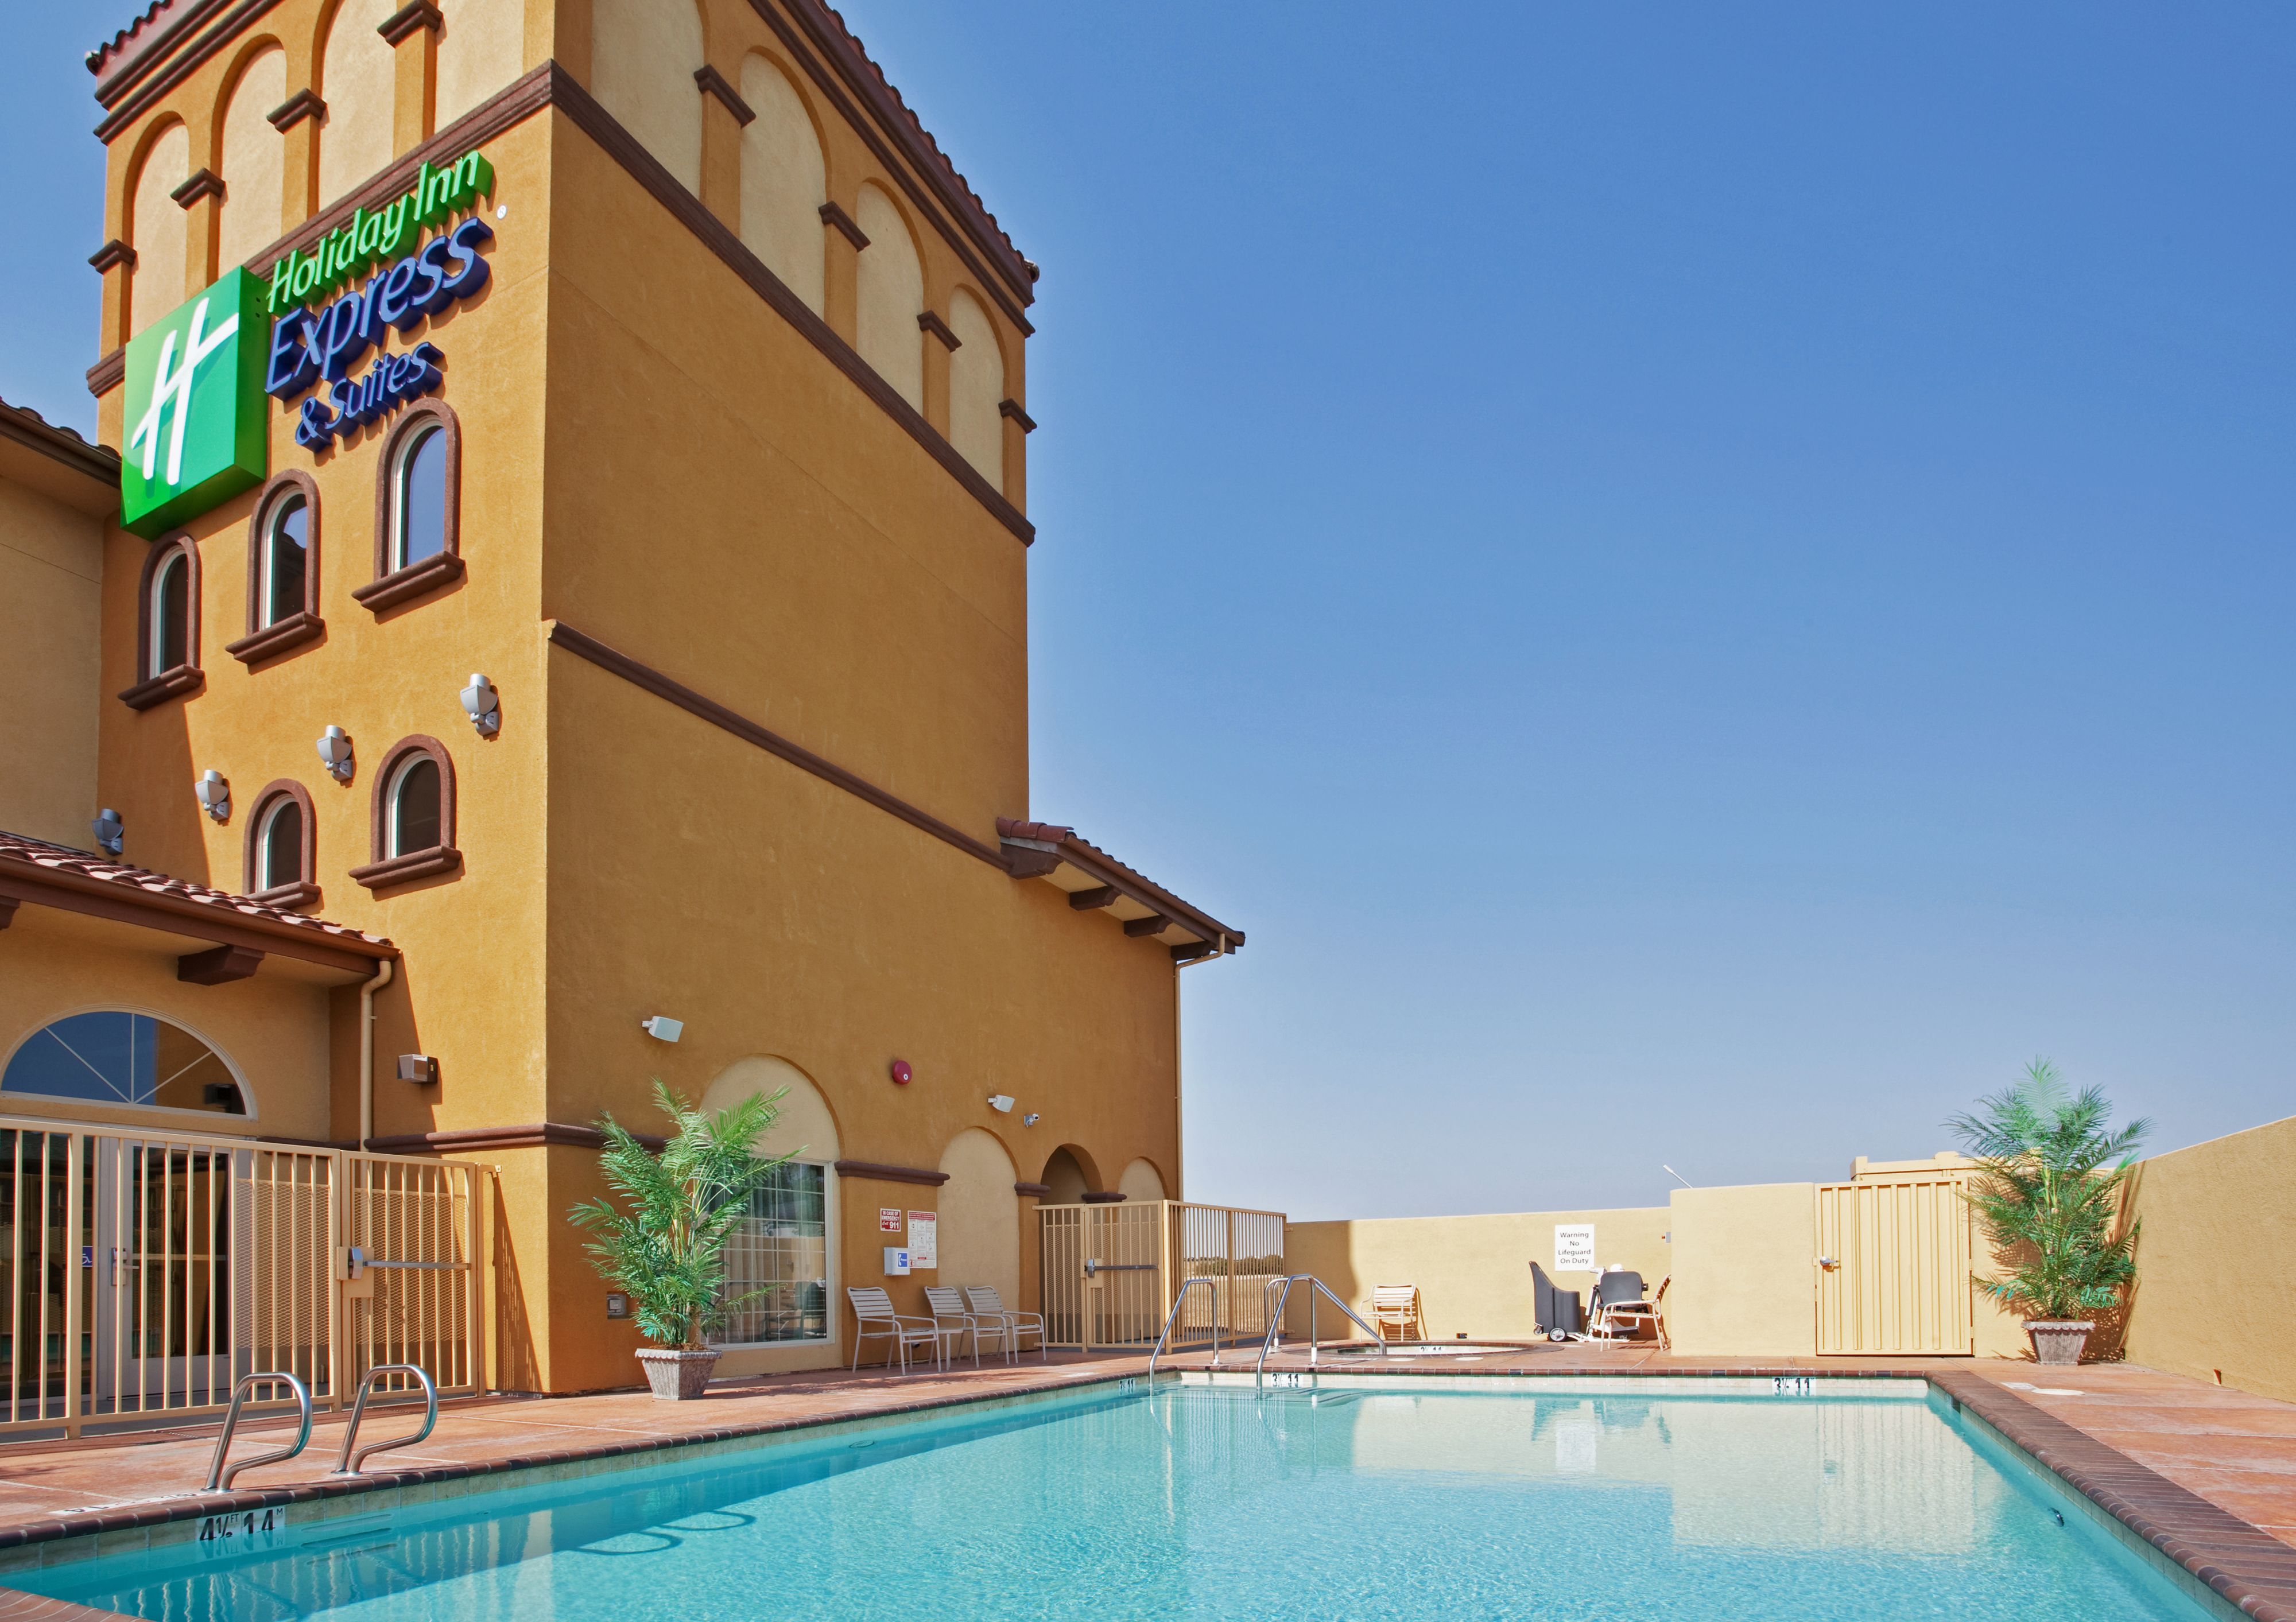 holiday-inn-express-and-suites-willows-2532850162-original.jpg